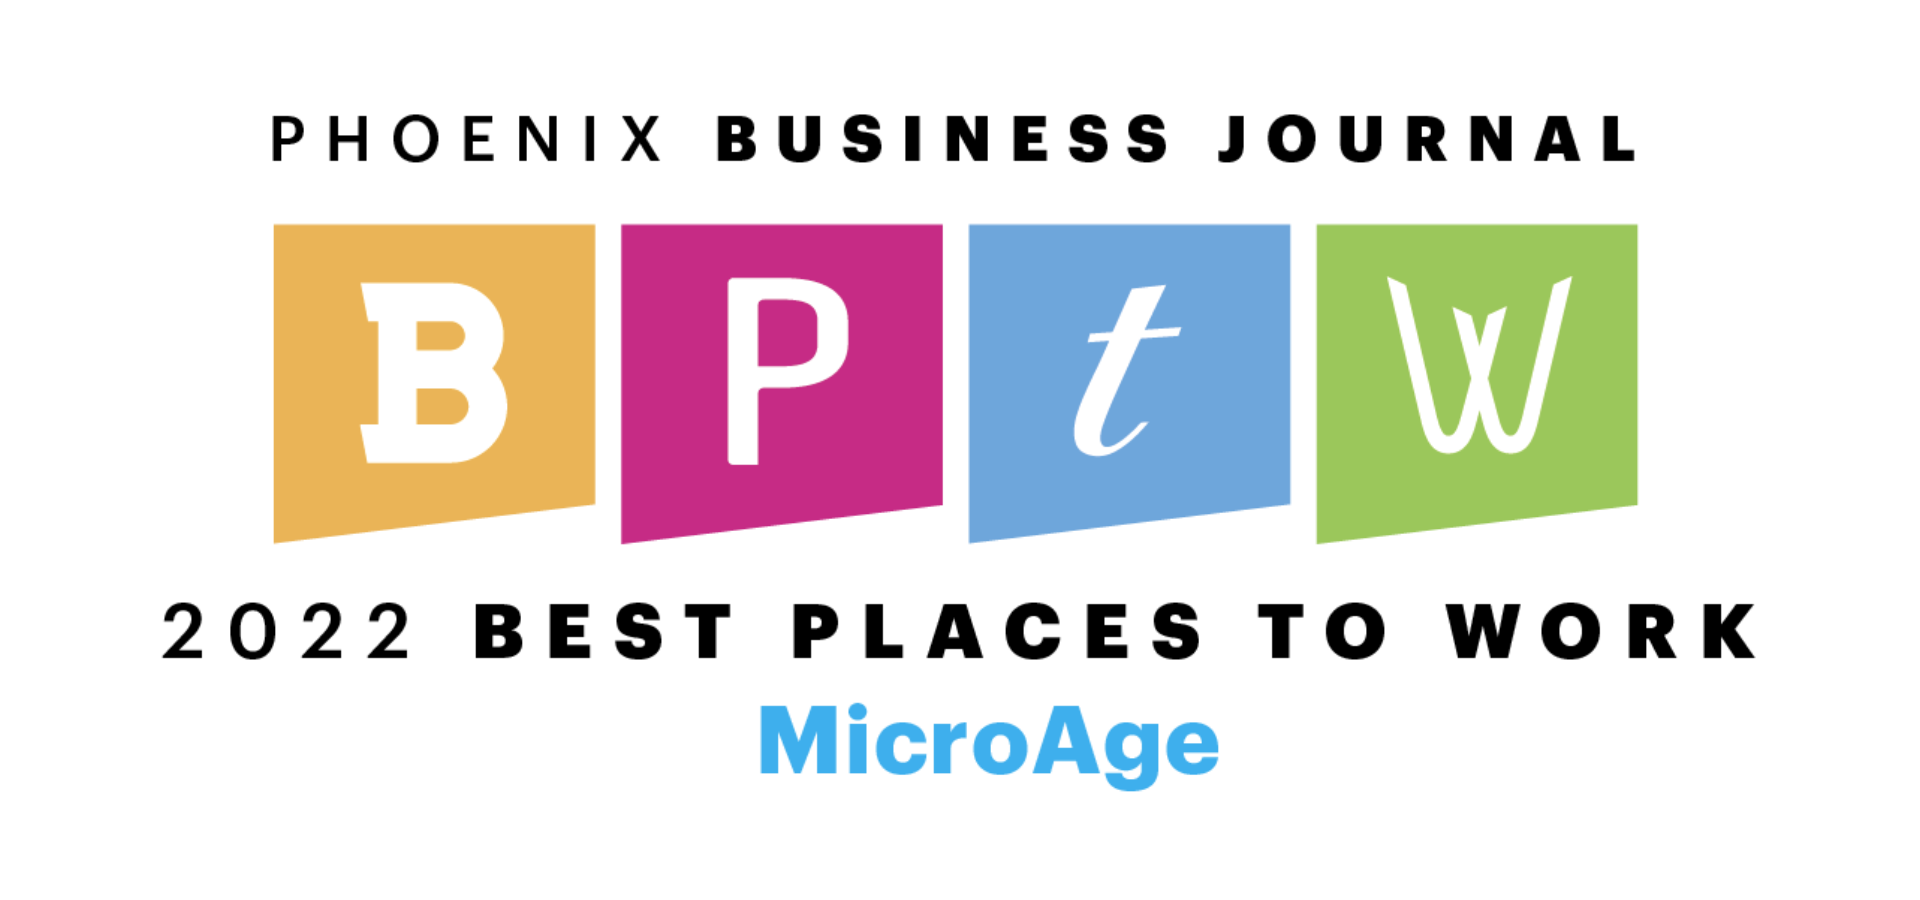 MicroAge Named a 2022 Best Places to Work logo